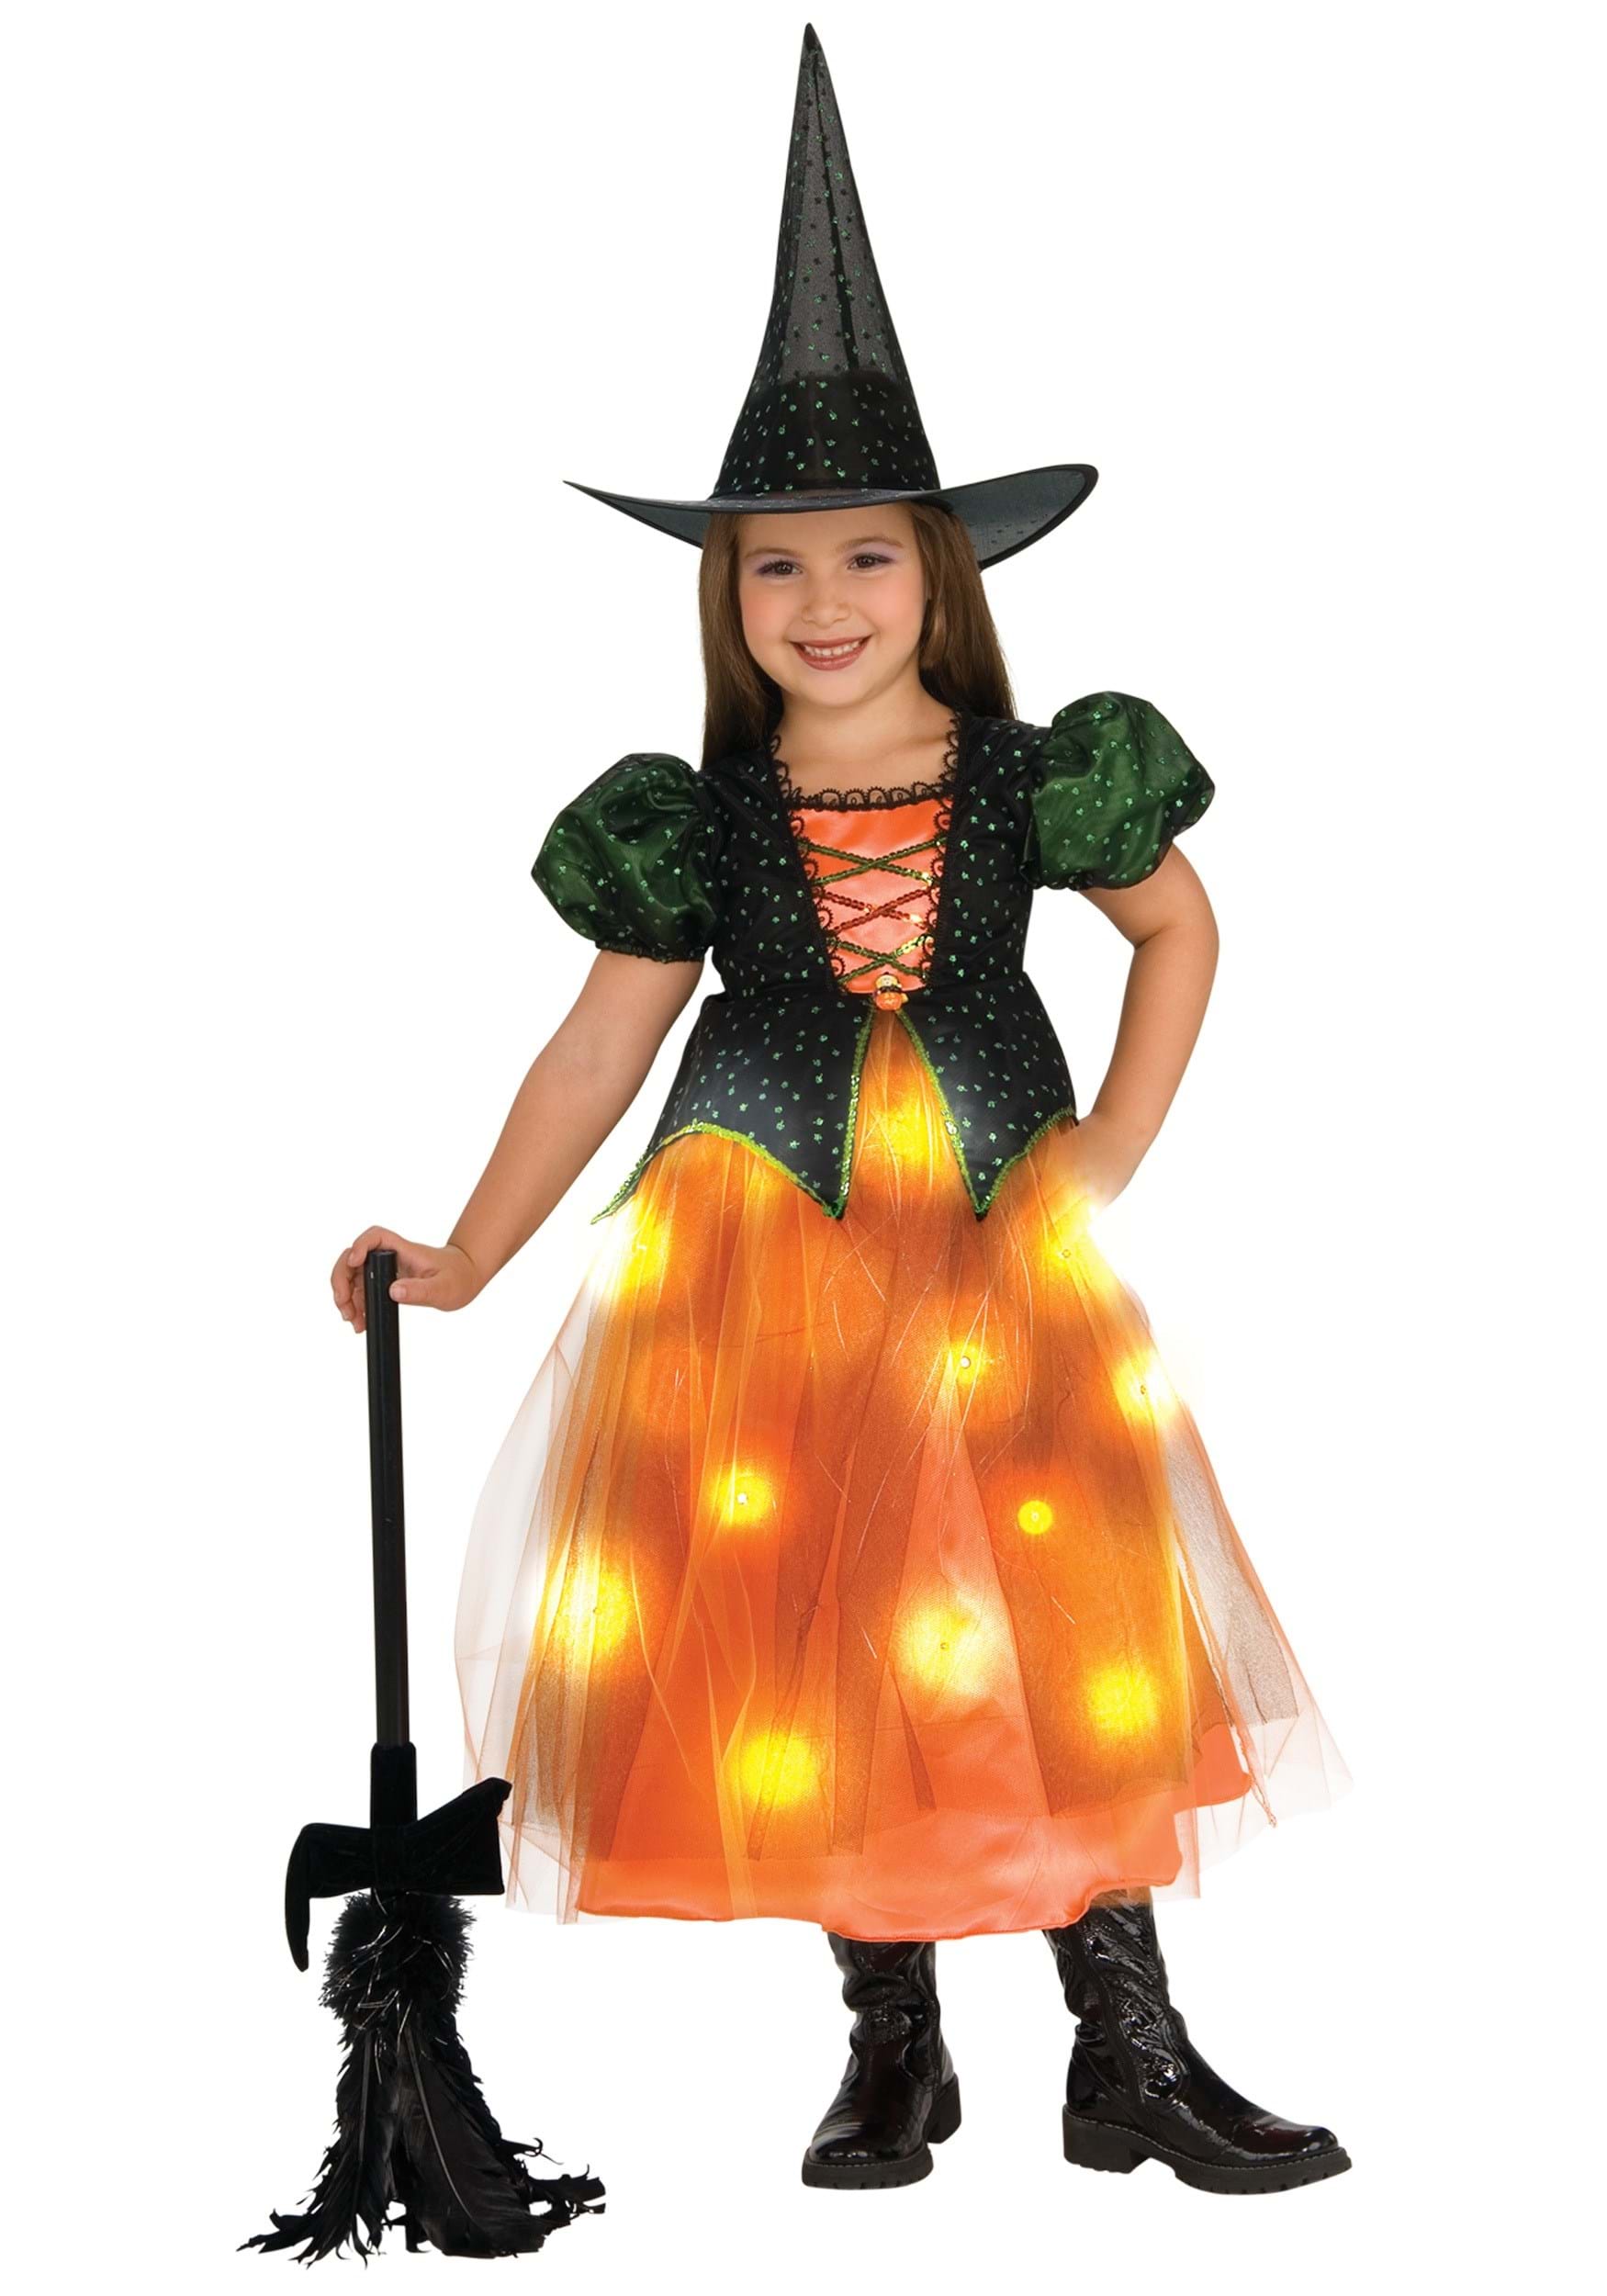 Photos - Fancy Dress Rubies Costume Co. Inc Twinkle Witch Costume for Girls | Light up Dress W/ 